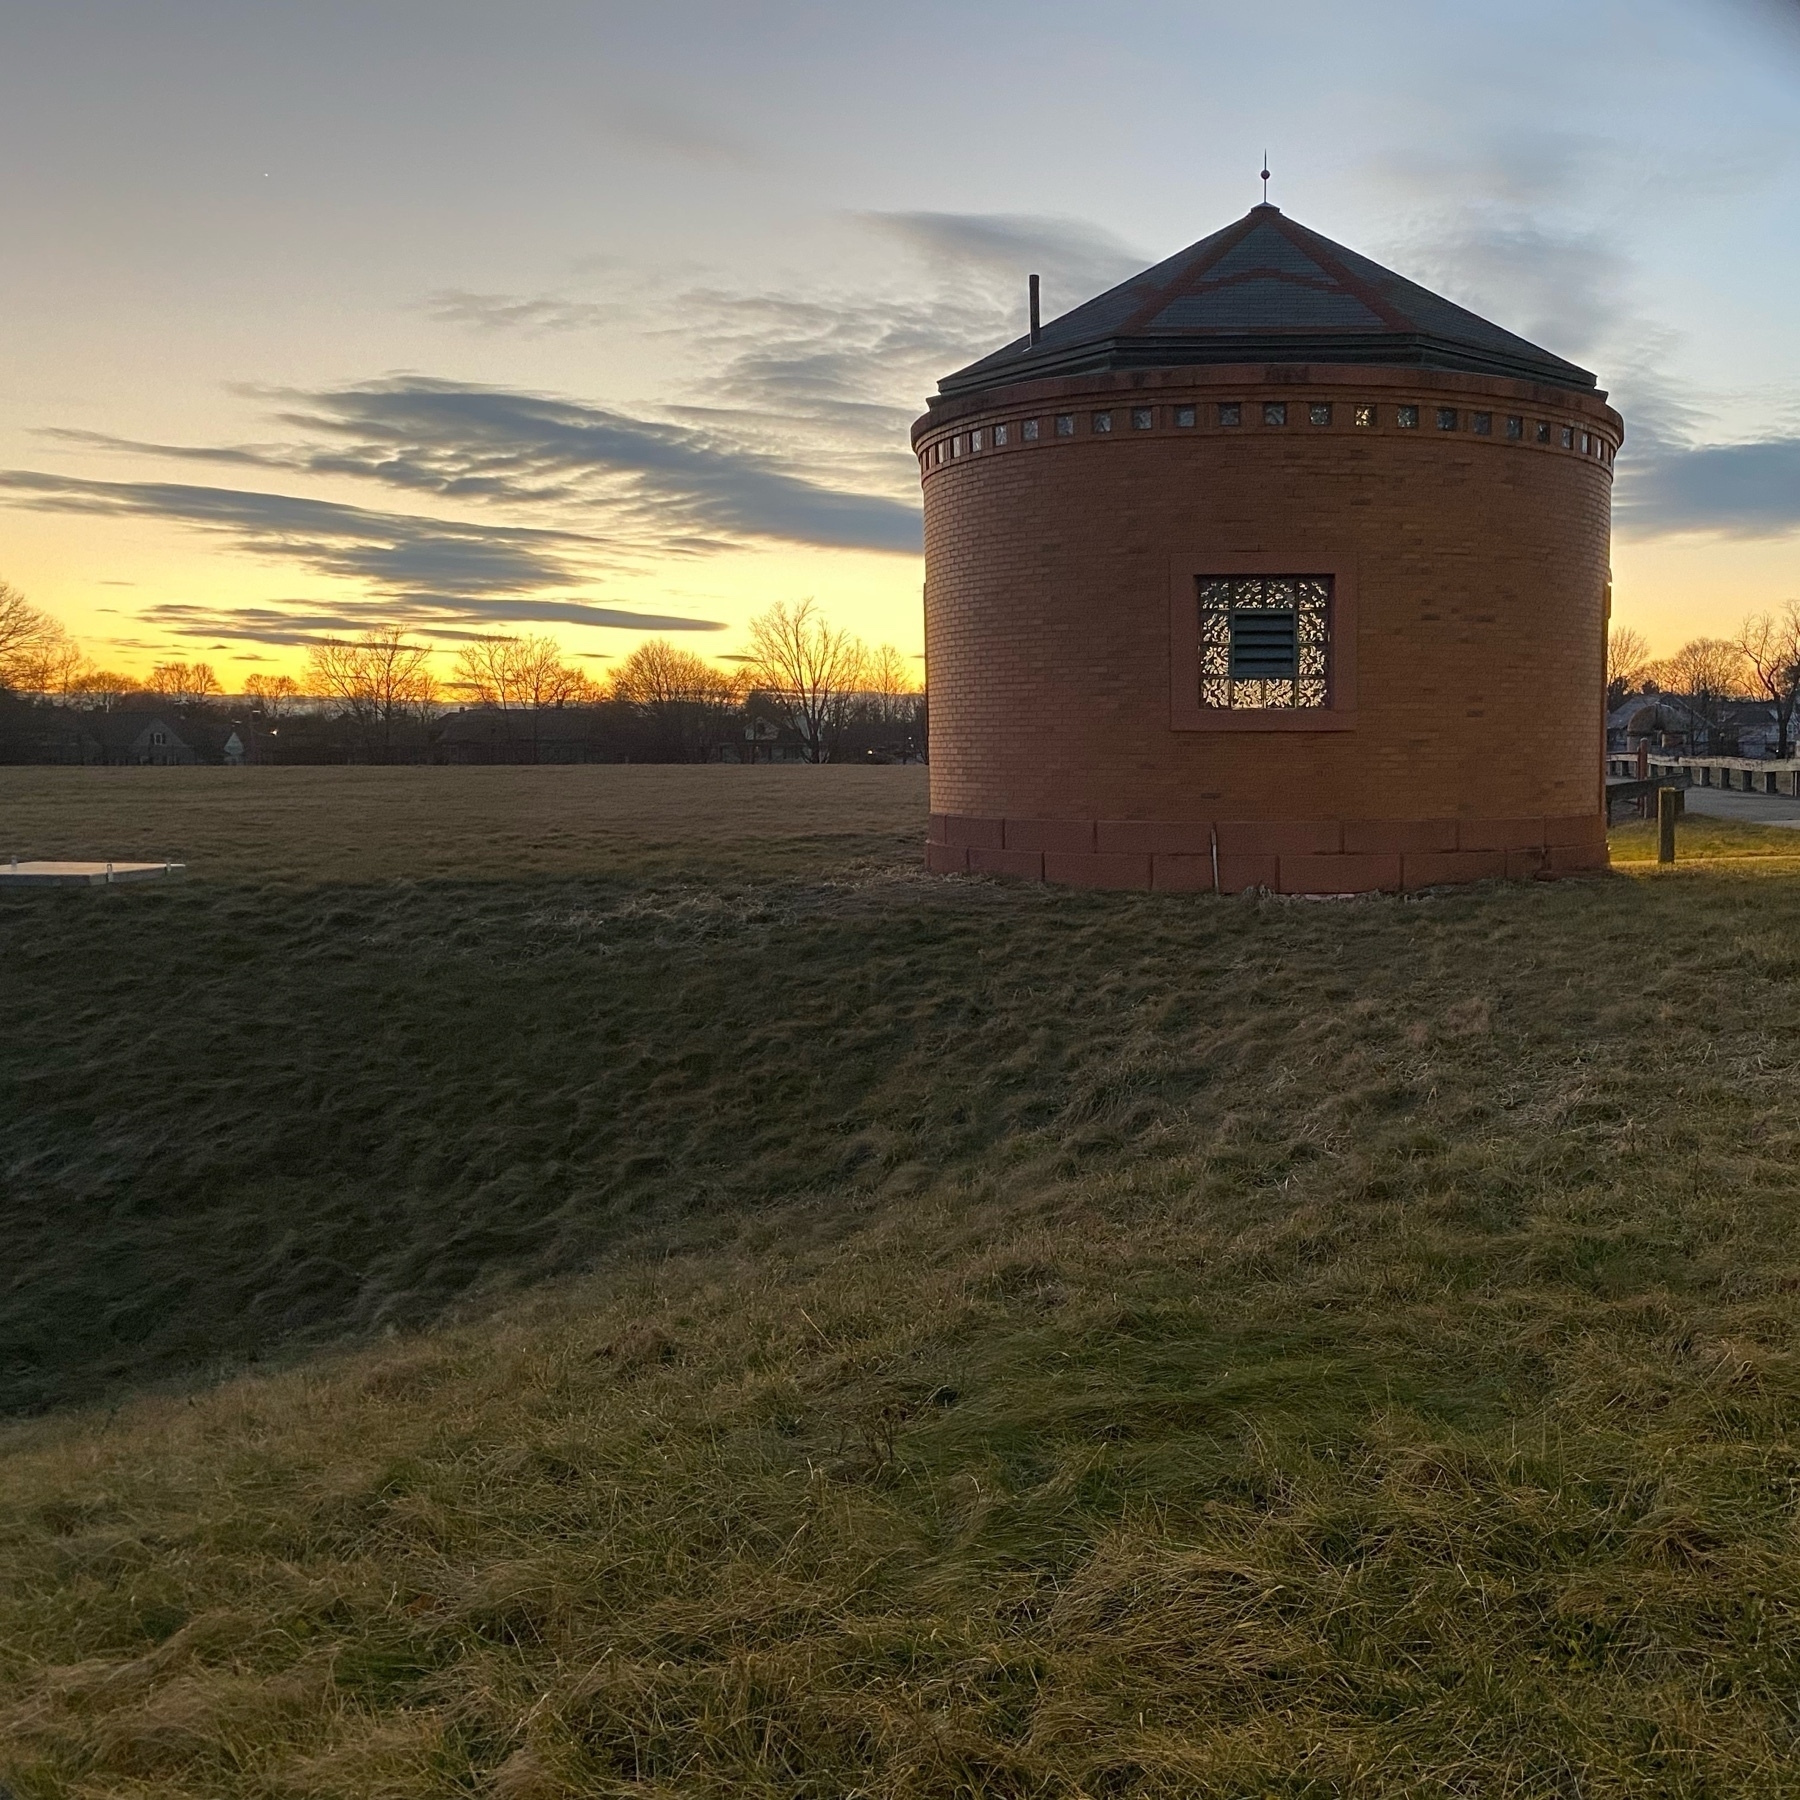 View of a small round brick building with an empty field and sunset behind it.